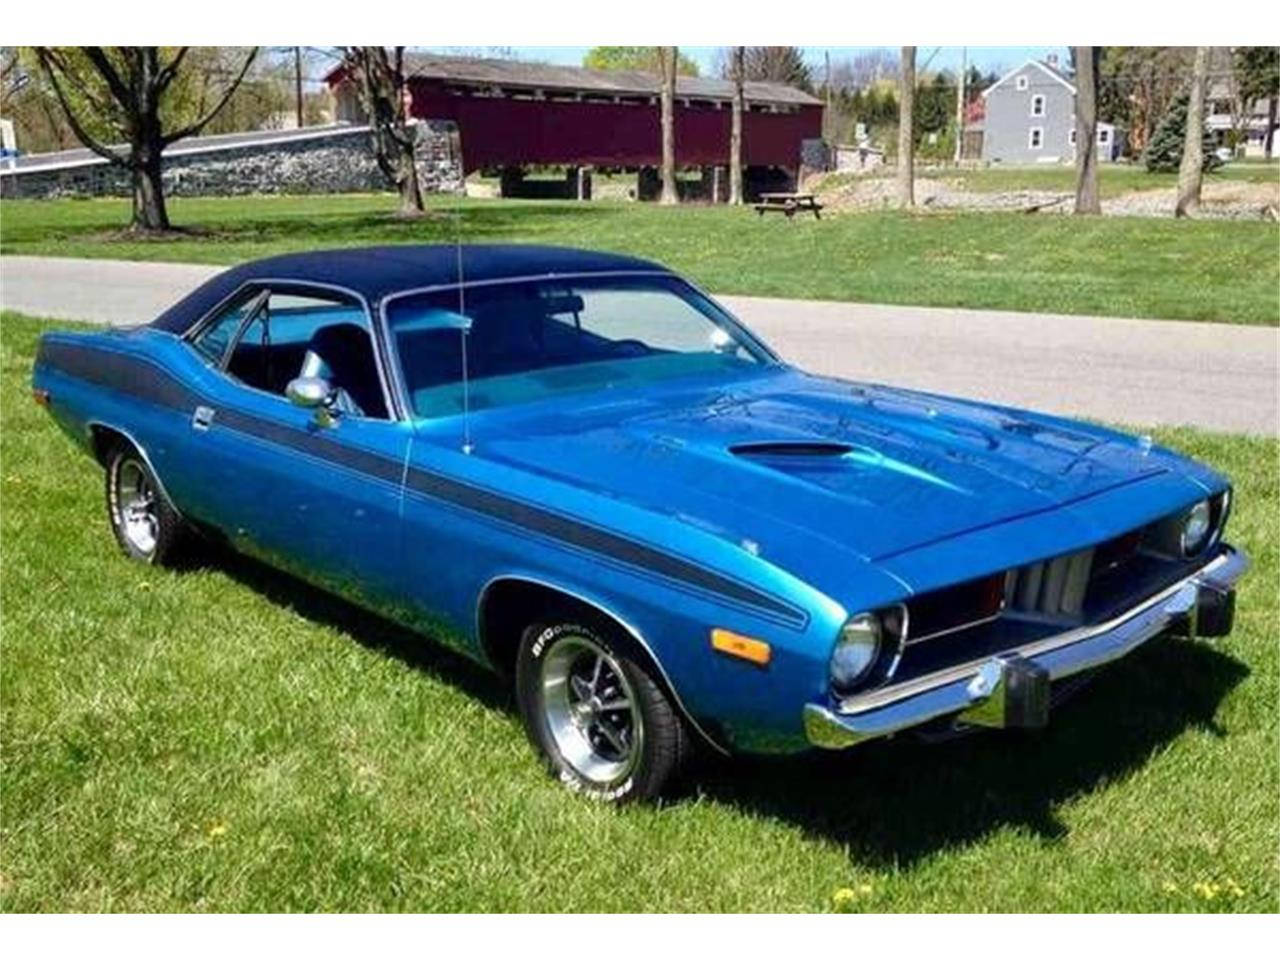 Blue Vintage Plymouth Barracuda On Grass Wallpaper